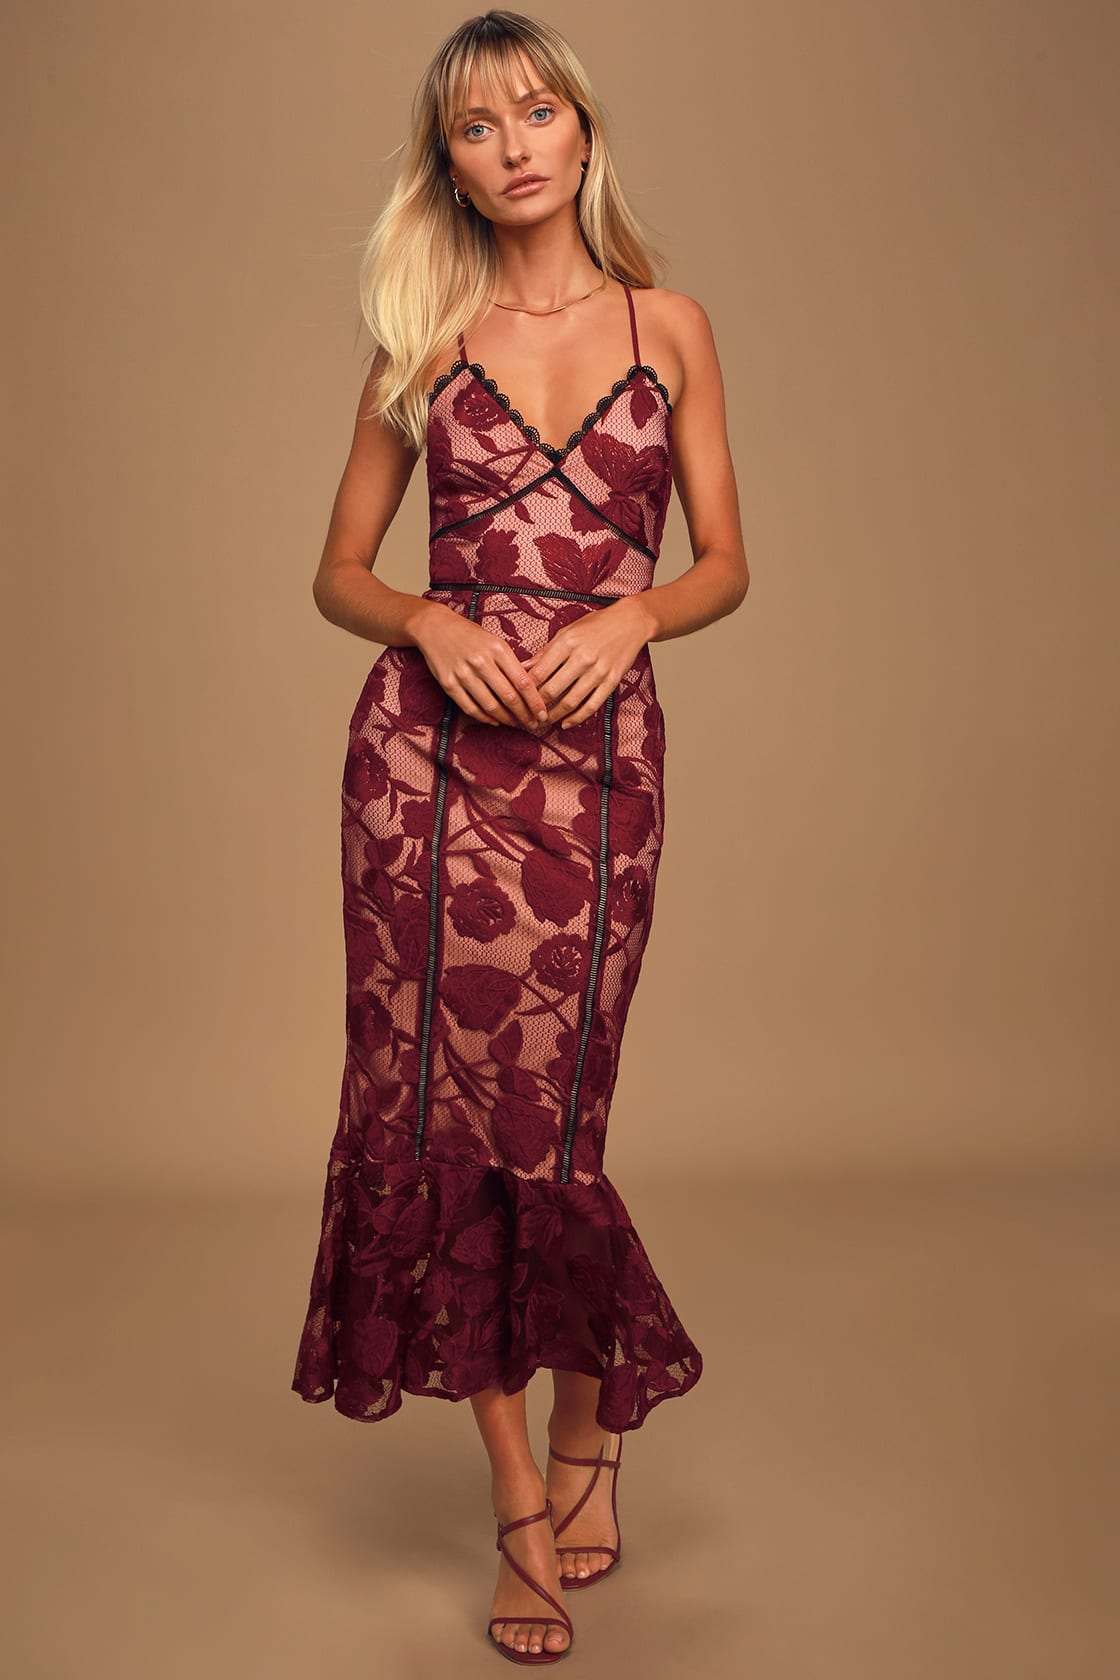 Alluring Dream Burgundy Floral Mesh Lace Trumpet Midi Homecoming Dress